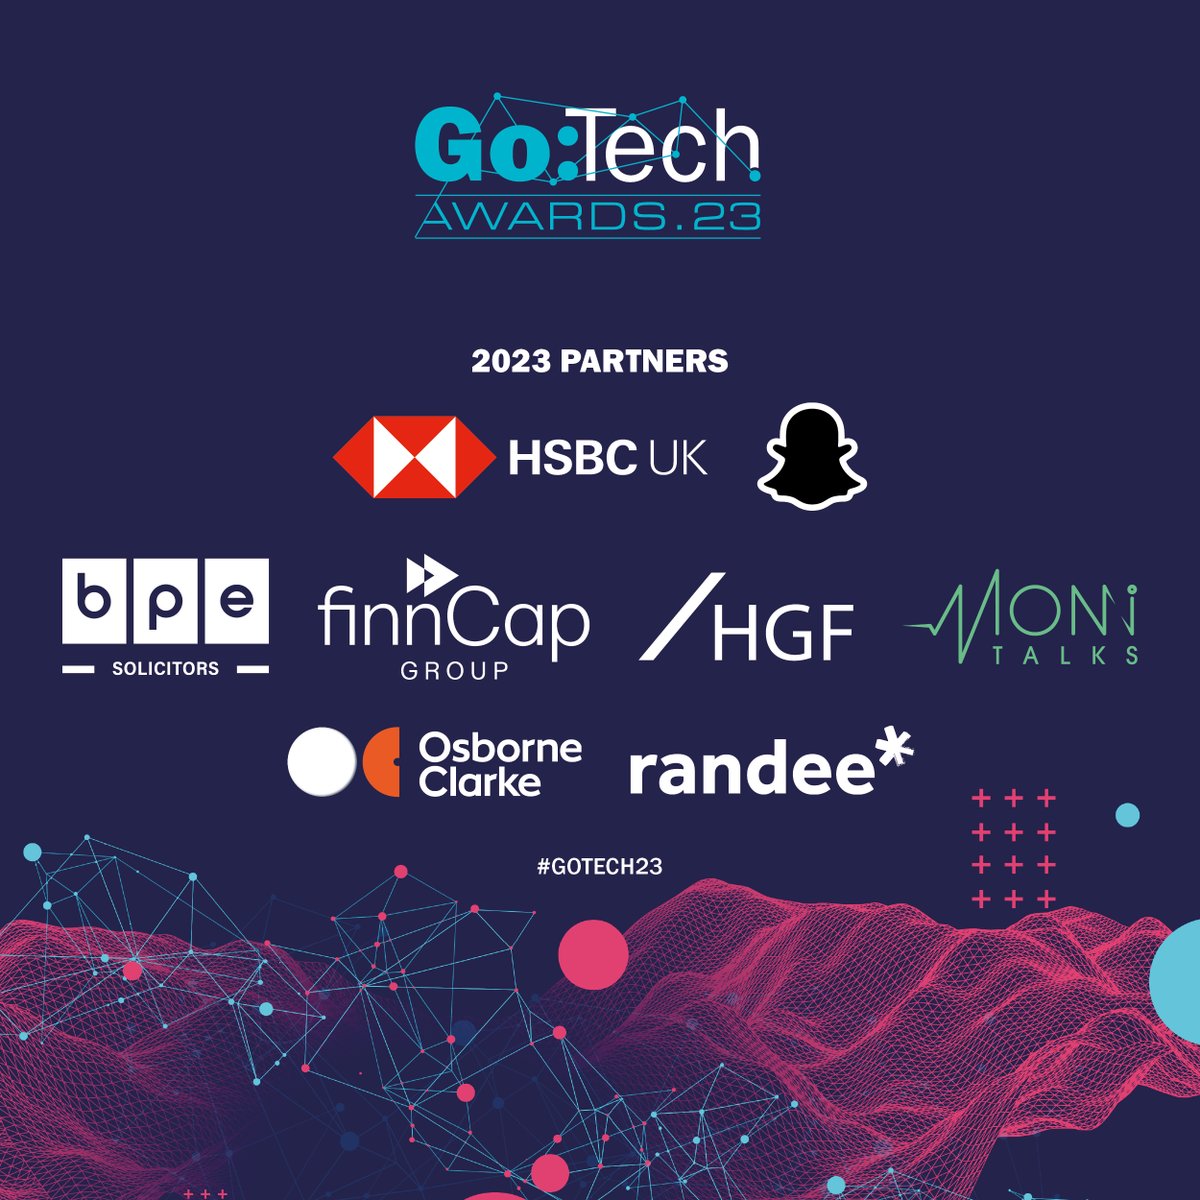 Don't miss the finalists' announcement @GoTechAwards on 5 April
@monineversleeps proud to sponsor this celebration of UK #tech sector #innovation
#gotech23 #techawards #techsector #fintech #technology #techevents #techcompanies #techindustry #techinnovation #techentrepreneur